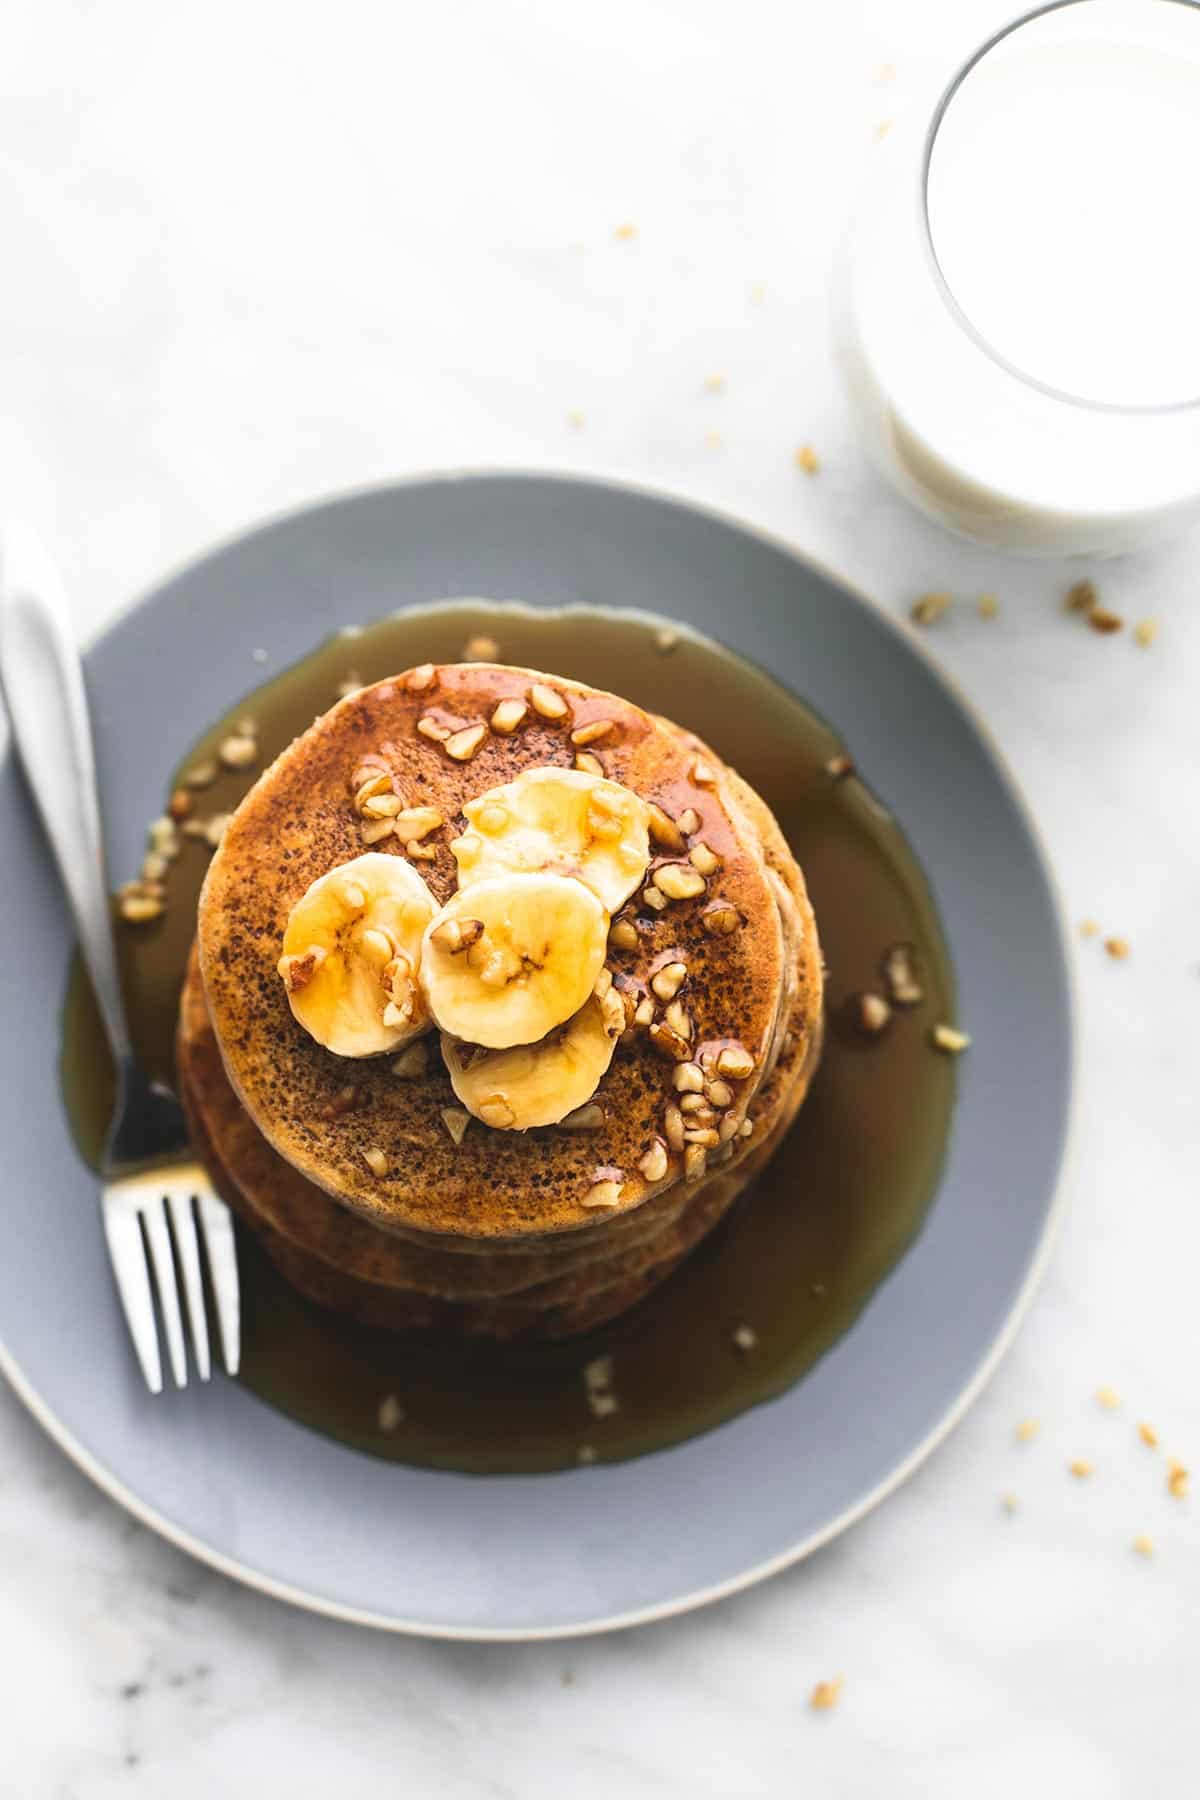 top view of a stack of oatmeal pancakes topped with bananas, chopped nuts, and syrup with a fork all on a plate with a glass of milk on the side.